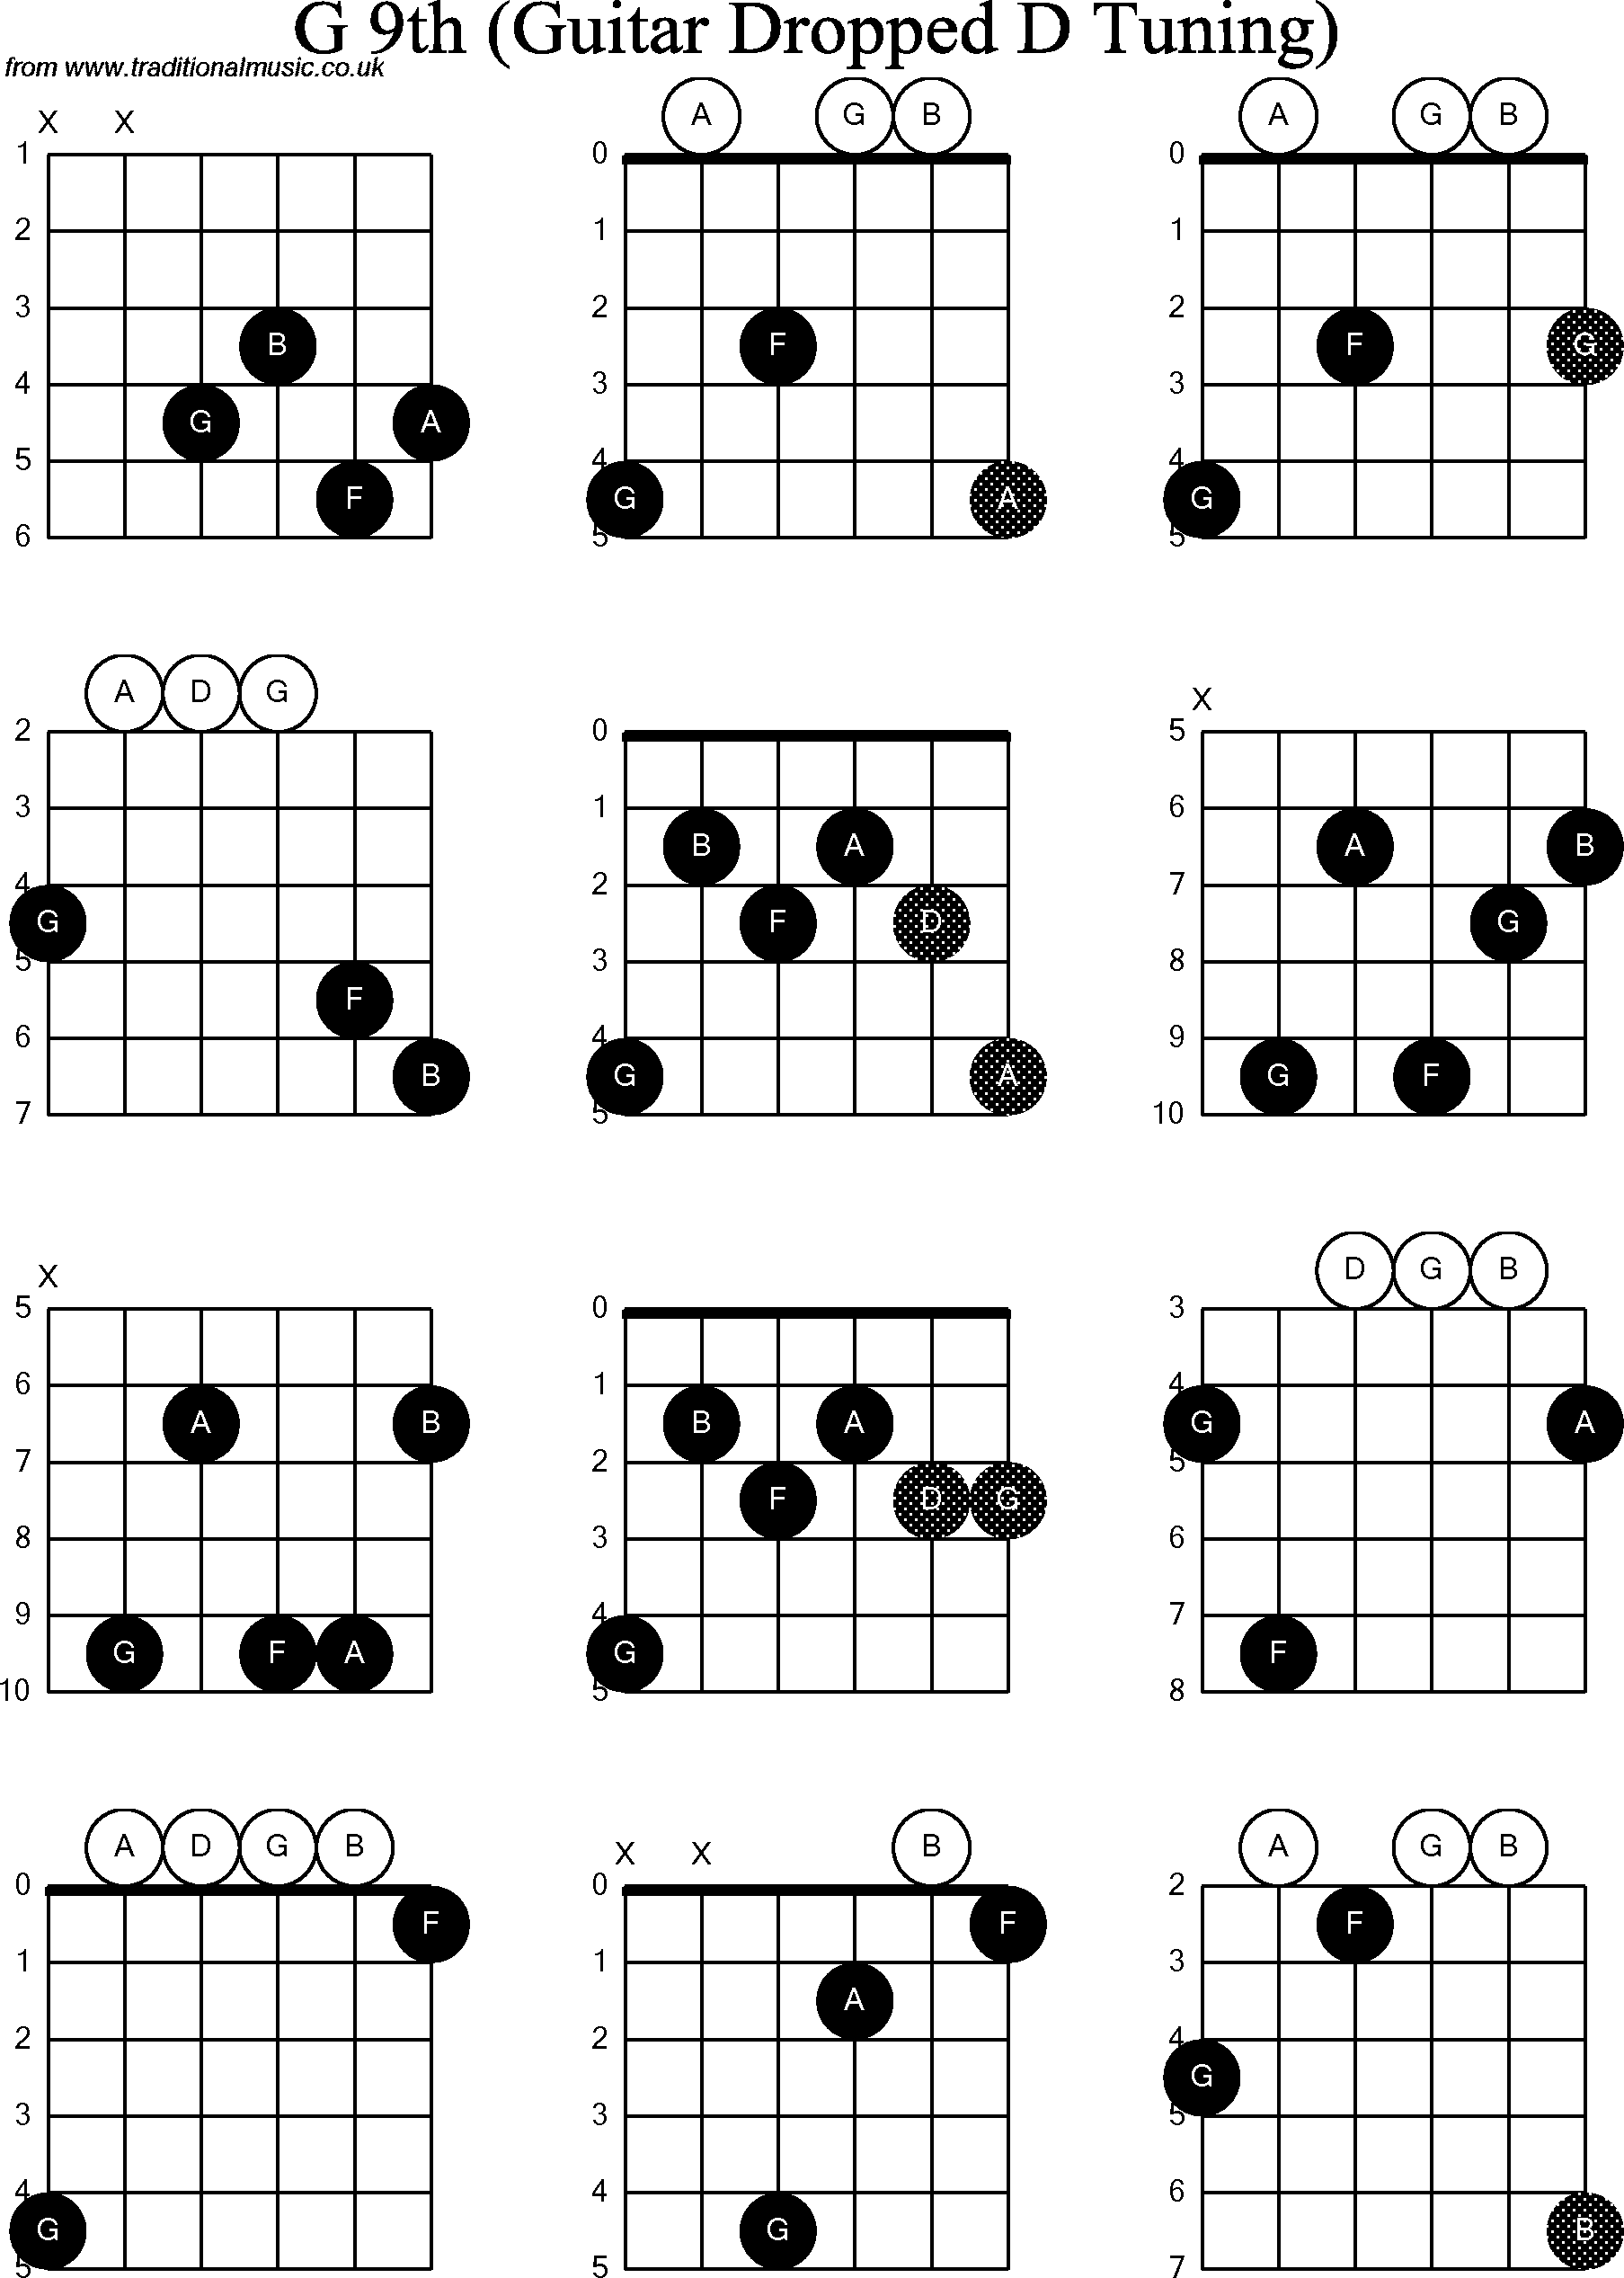 Chord diagrams for dropped D Guitar(DADGBE), G9th